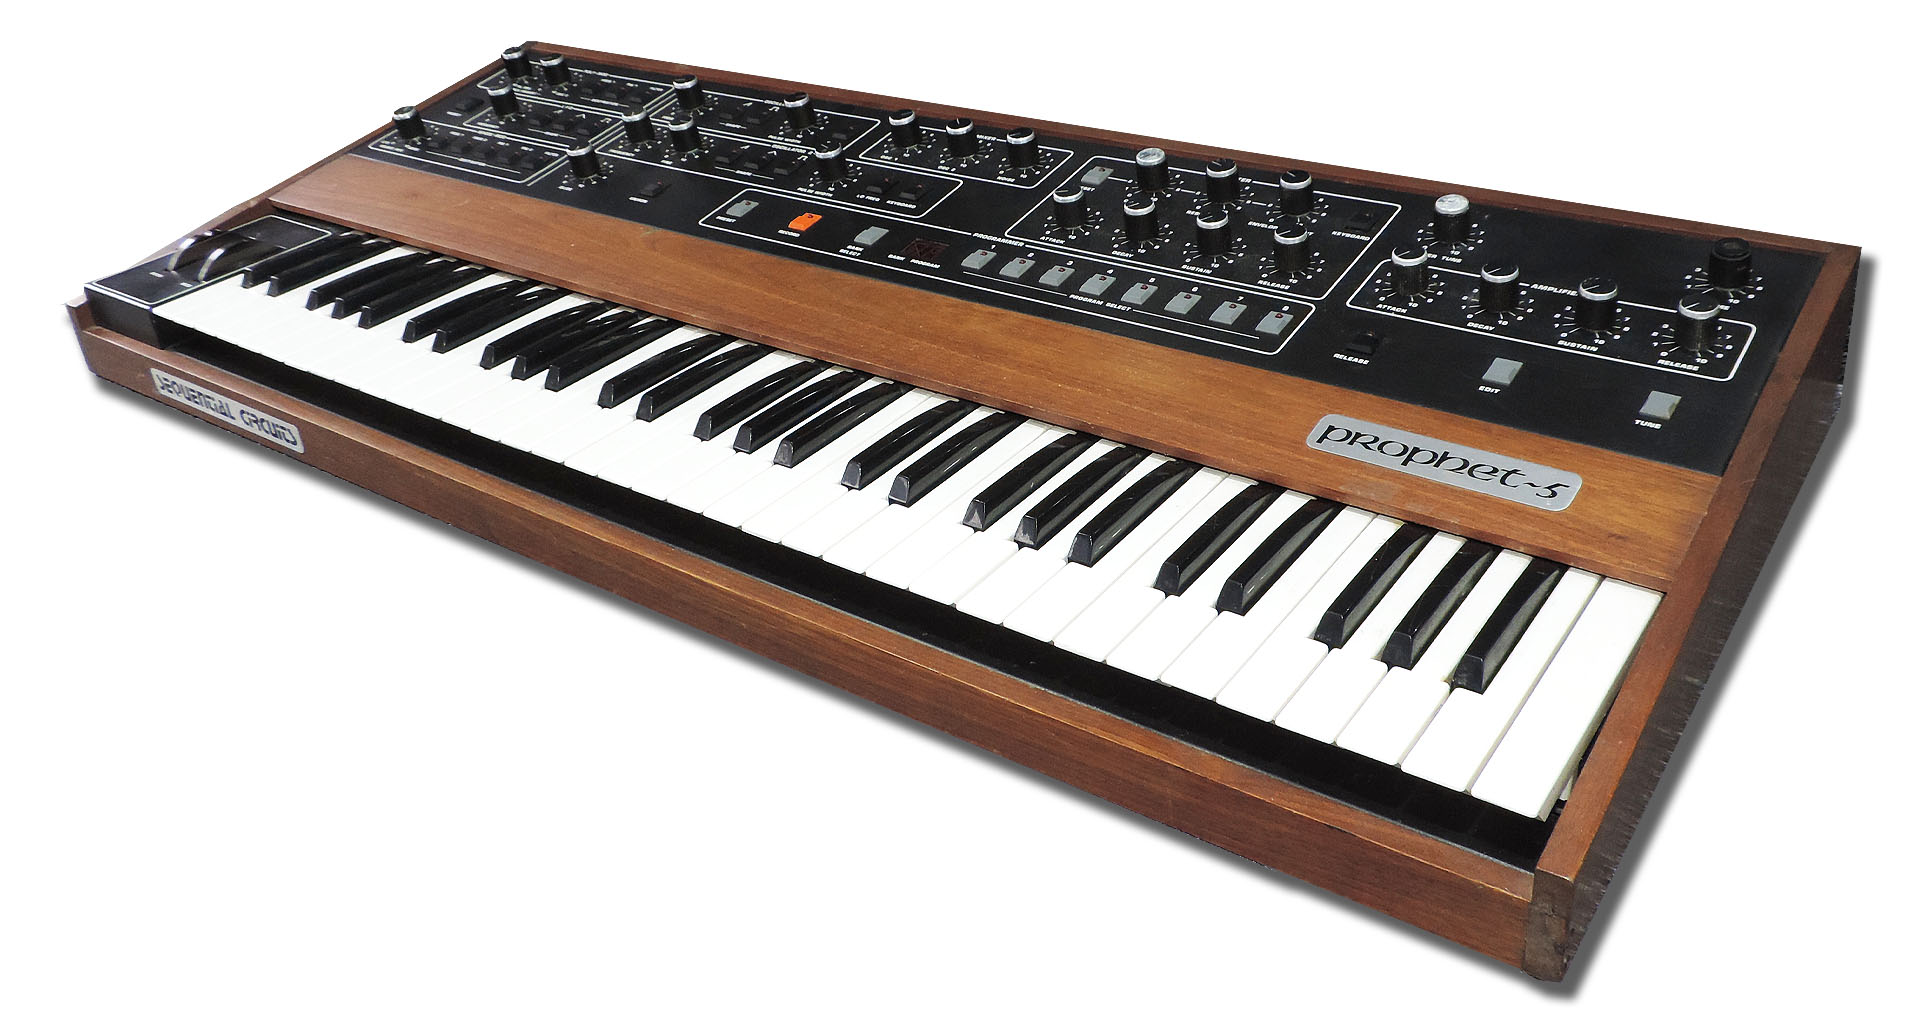 A Sequential Circuits Prophet 5 last used over thirty years ago.